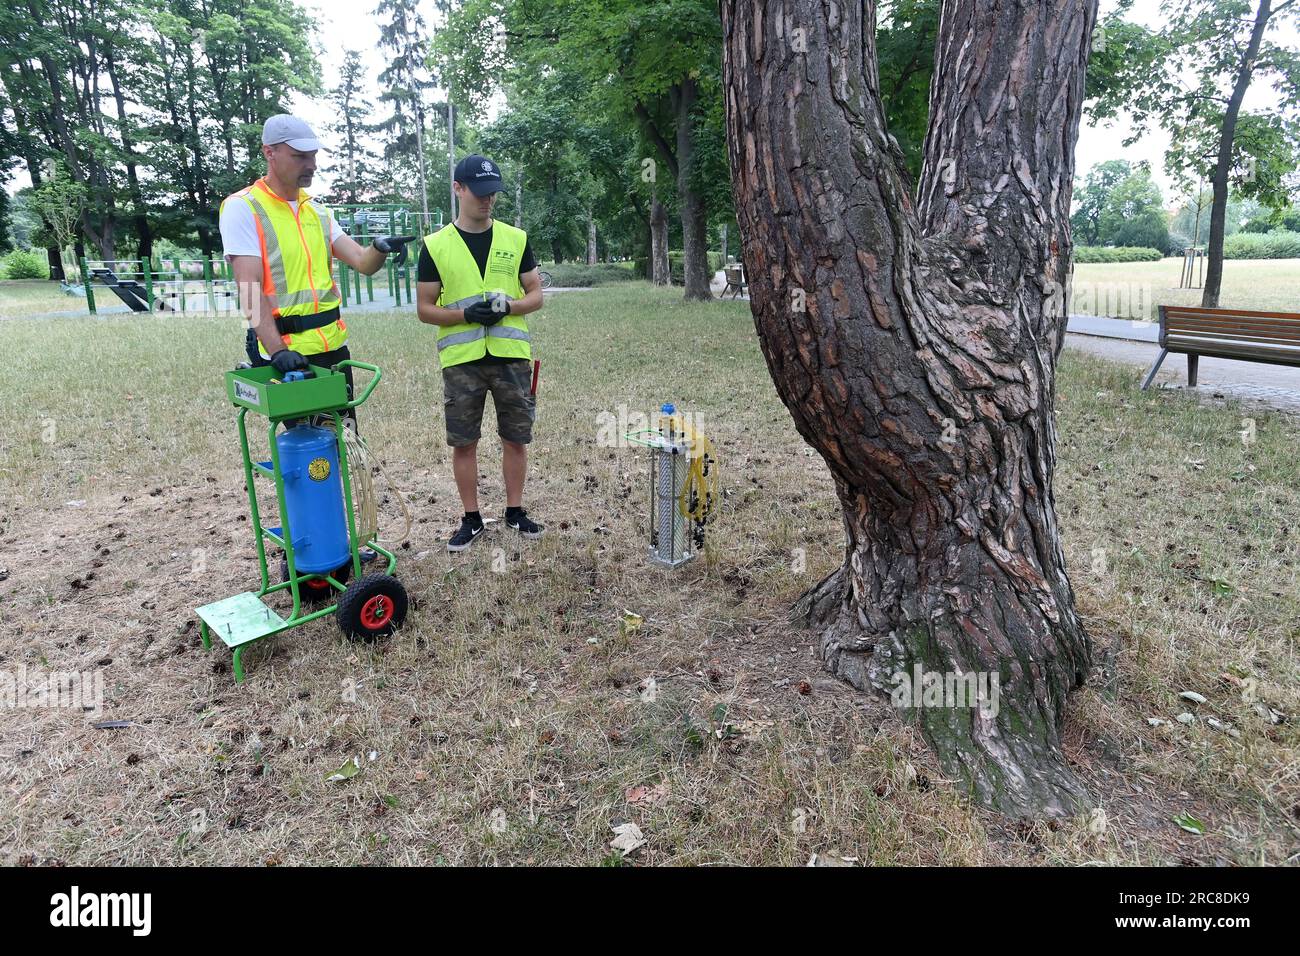 Certified arborist Vaclav Drhlik (left) and his son Filip are about to treat a pine tree against the parasitic fungal disease Lophodermium seditiosum in Kolarovy sady, Prostejov, Czech Republic, July 13, 2023. The town hall has allocated a total of 61 trees in the town for professional treatment. In addition to pine trees, which are treated with a nutrient solution of phosphorus, potassium and trace elements, they also treat Aesculus species infested with the horse-chestnut leaf miner (Cameraria ohridella) using insecticides. Both methods are environmentally friendly, as they are injected dire Stock Photo